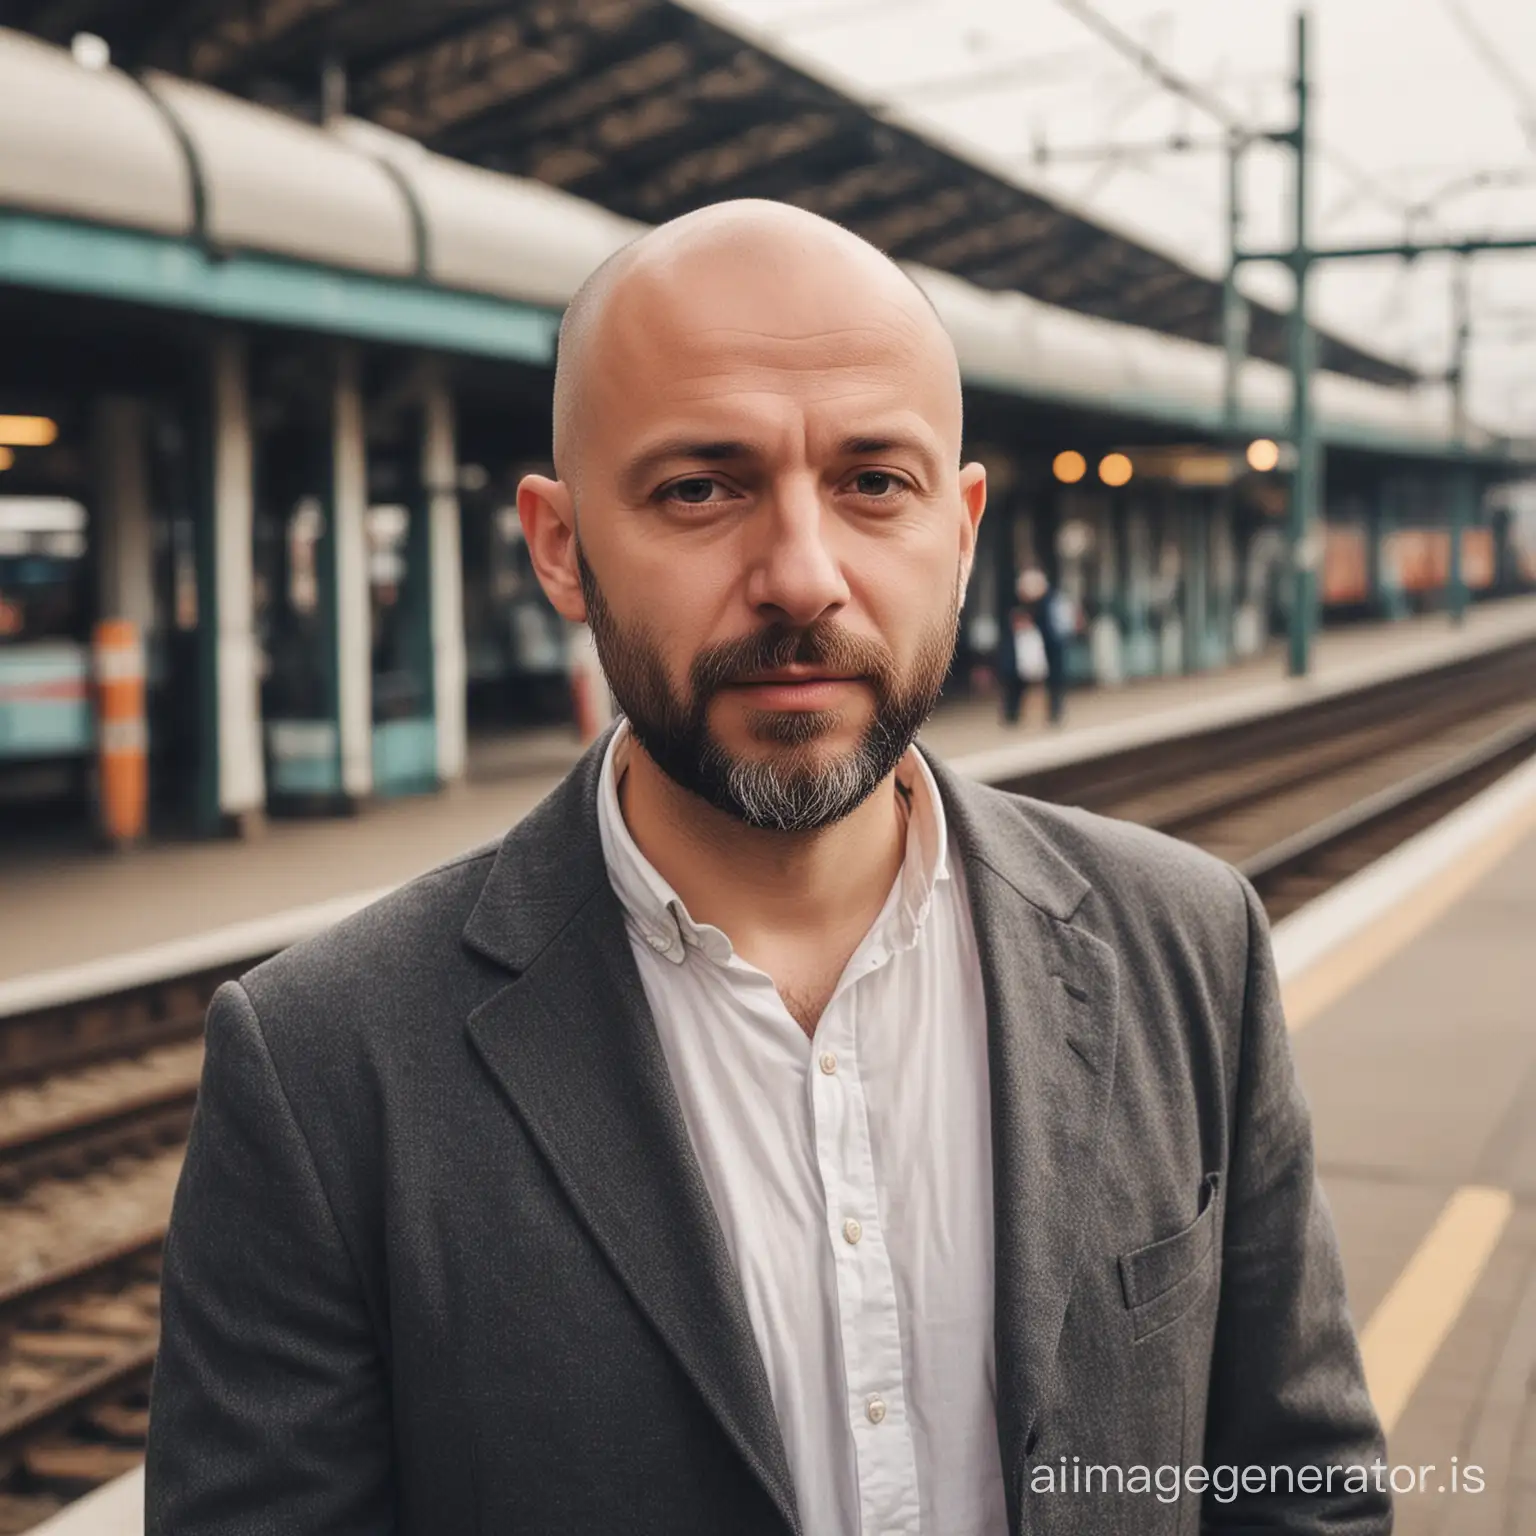 Bald man with small beard standing at the railway station waiting for the train